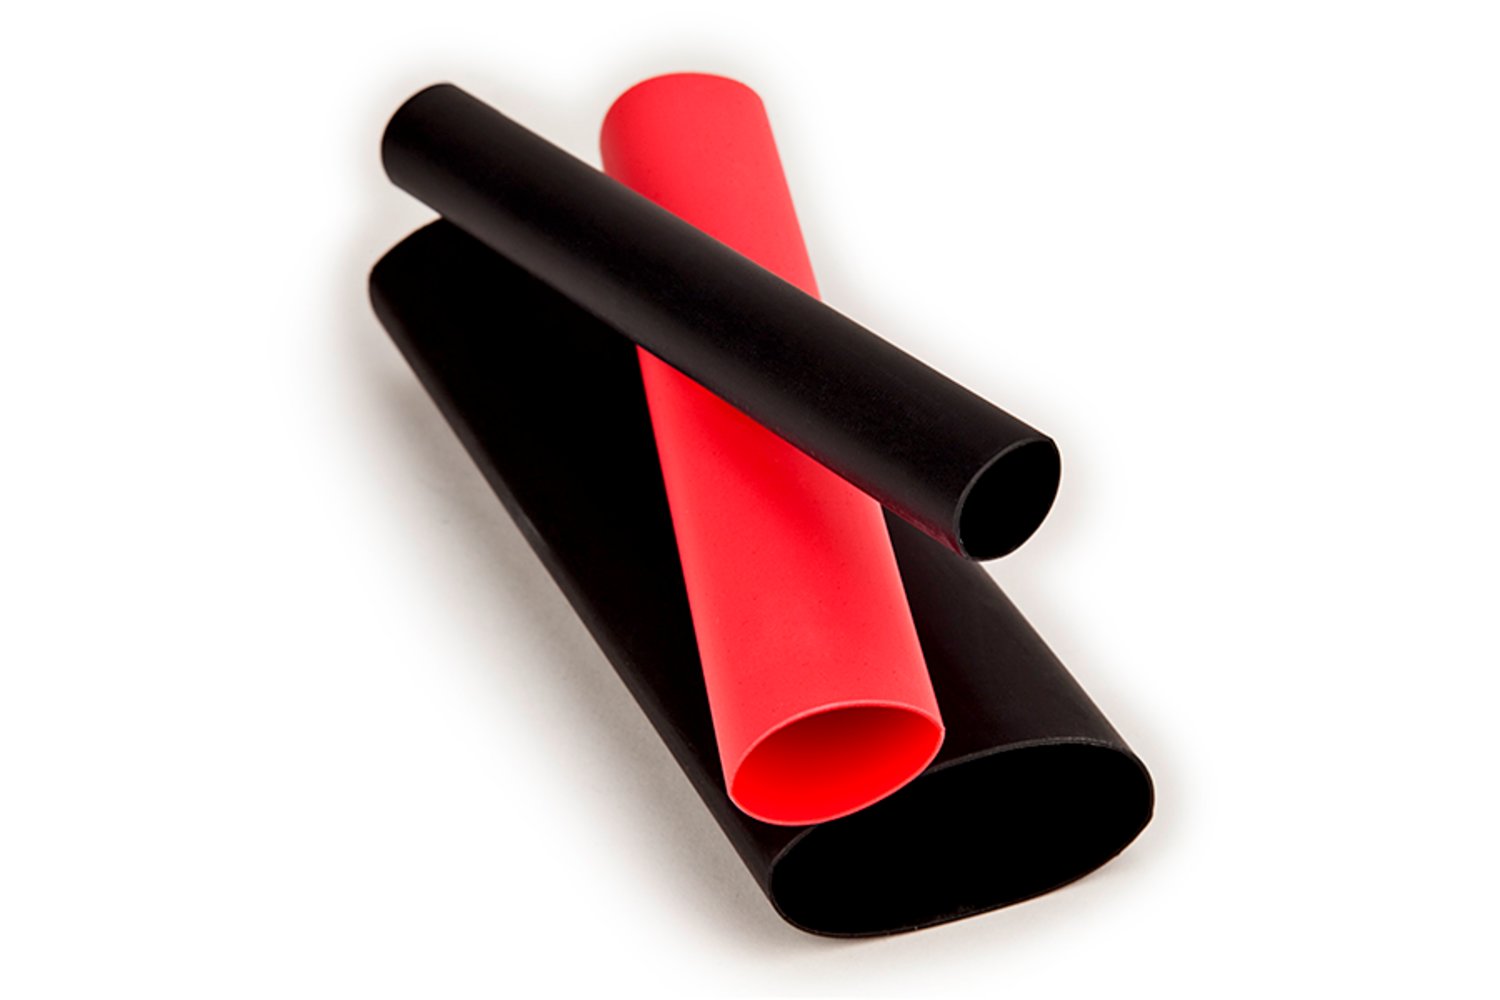 7010303649 - 3M Thin-Wall Heat Shrink Tubing EPS-300, Adhesive-Lined, 3/8" Red, 6-in
piece, 400/Case